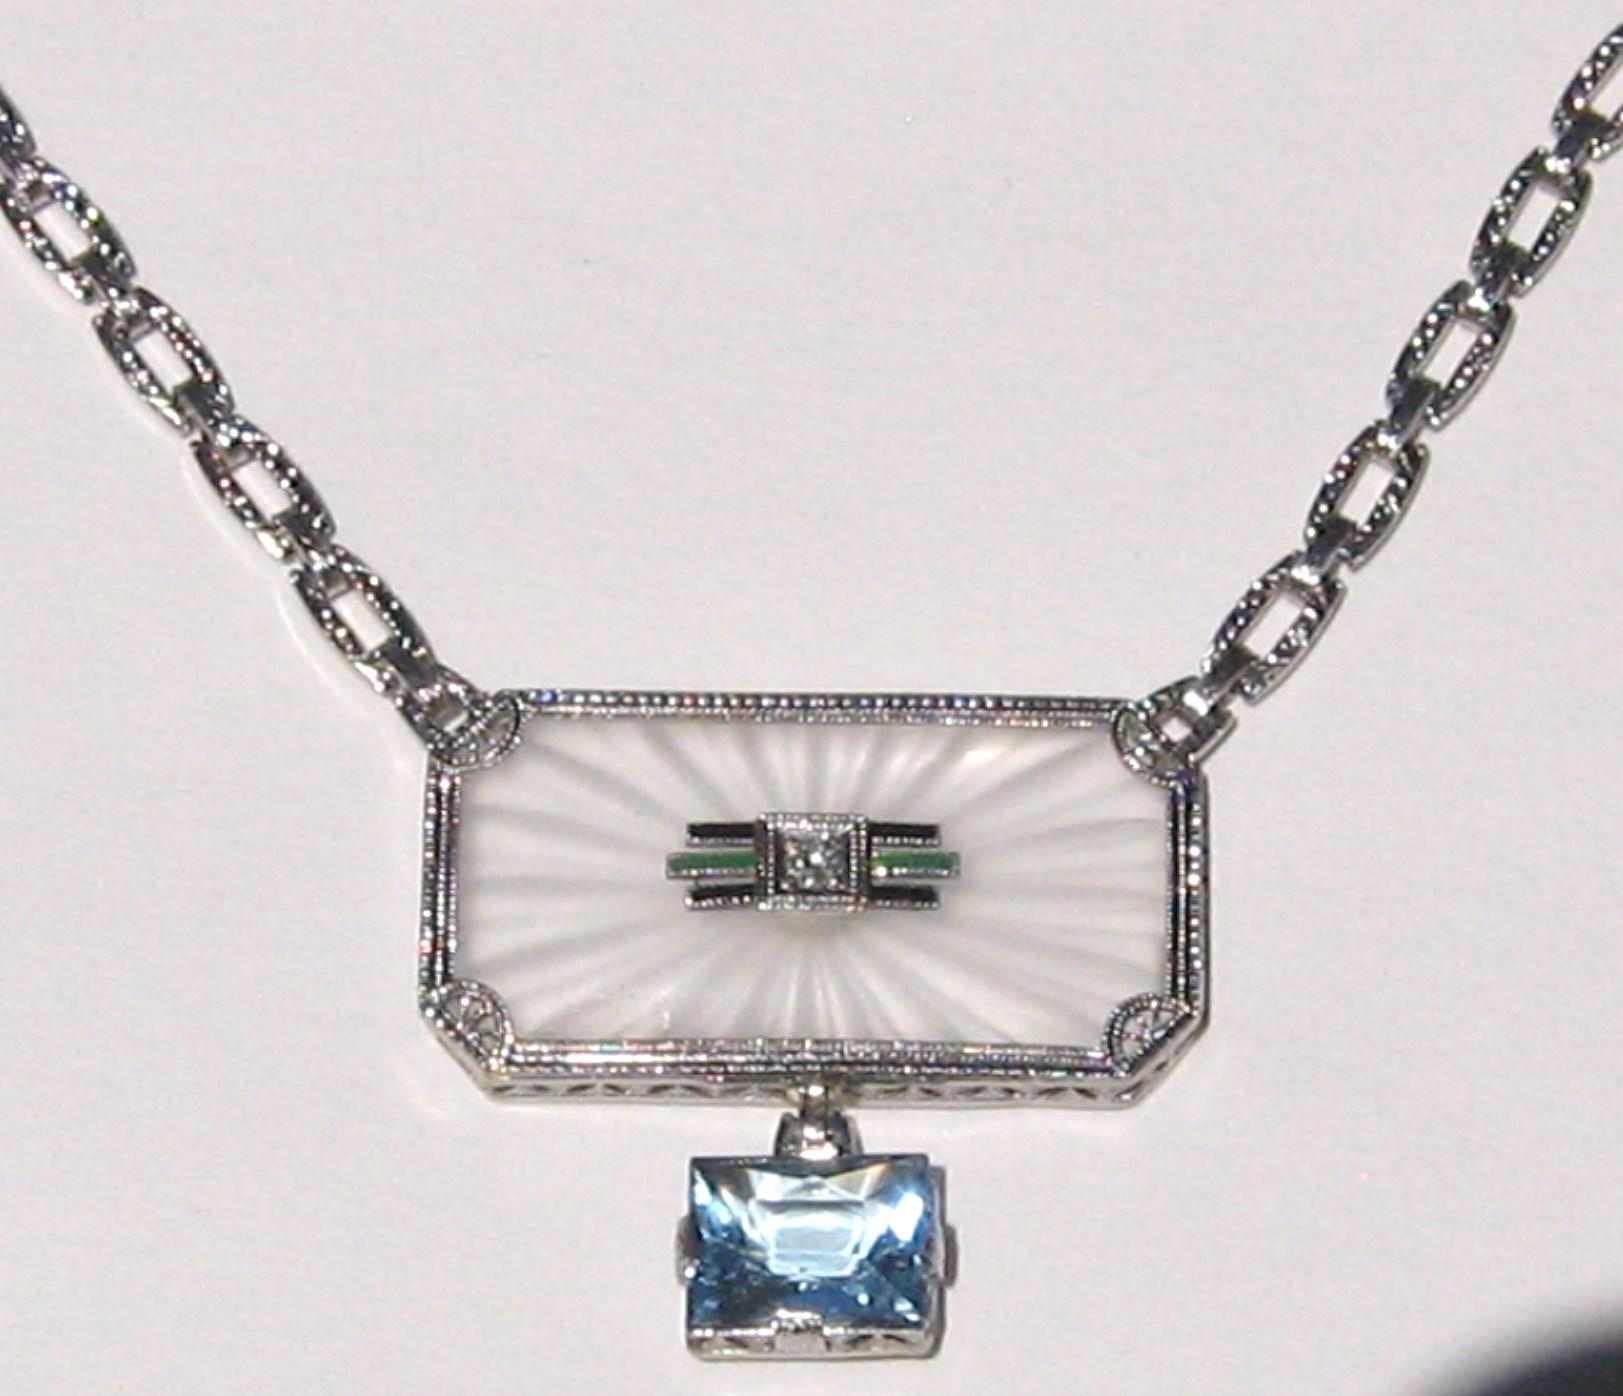 This is truly a stunning 14k White Gold Camphor Glass necklace. It has a center accent diamond with enameling surrounding it. There a 2.2 Carat aquamarine dangling down. The chain on this is also stunning. Measuring 17 in. end to end. What a